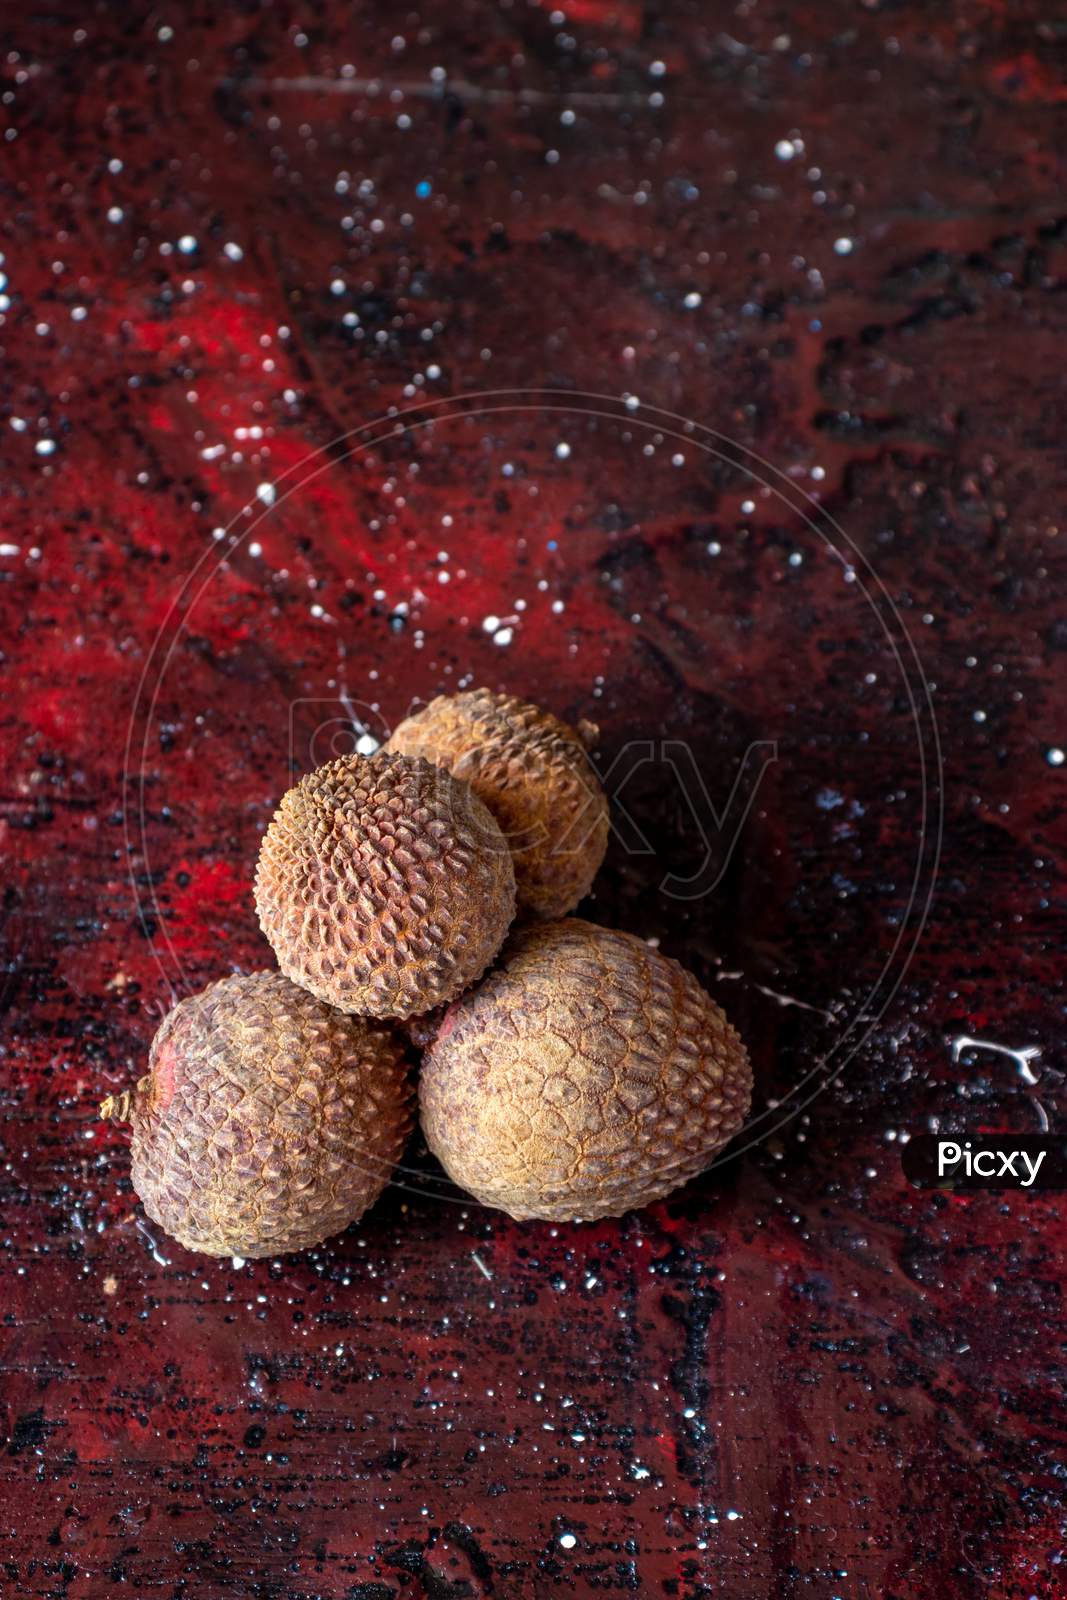 Ripe Lychee Or Lichi Isolated On Reddish Background In Vertical Orientation